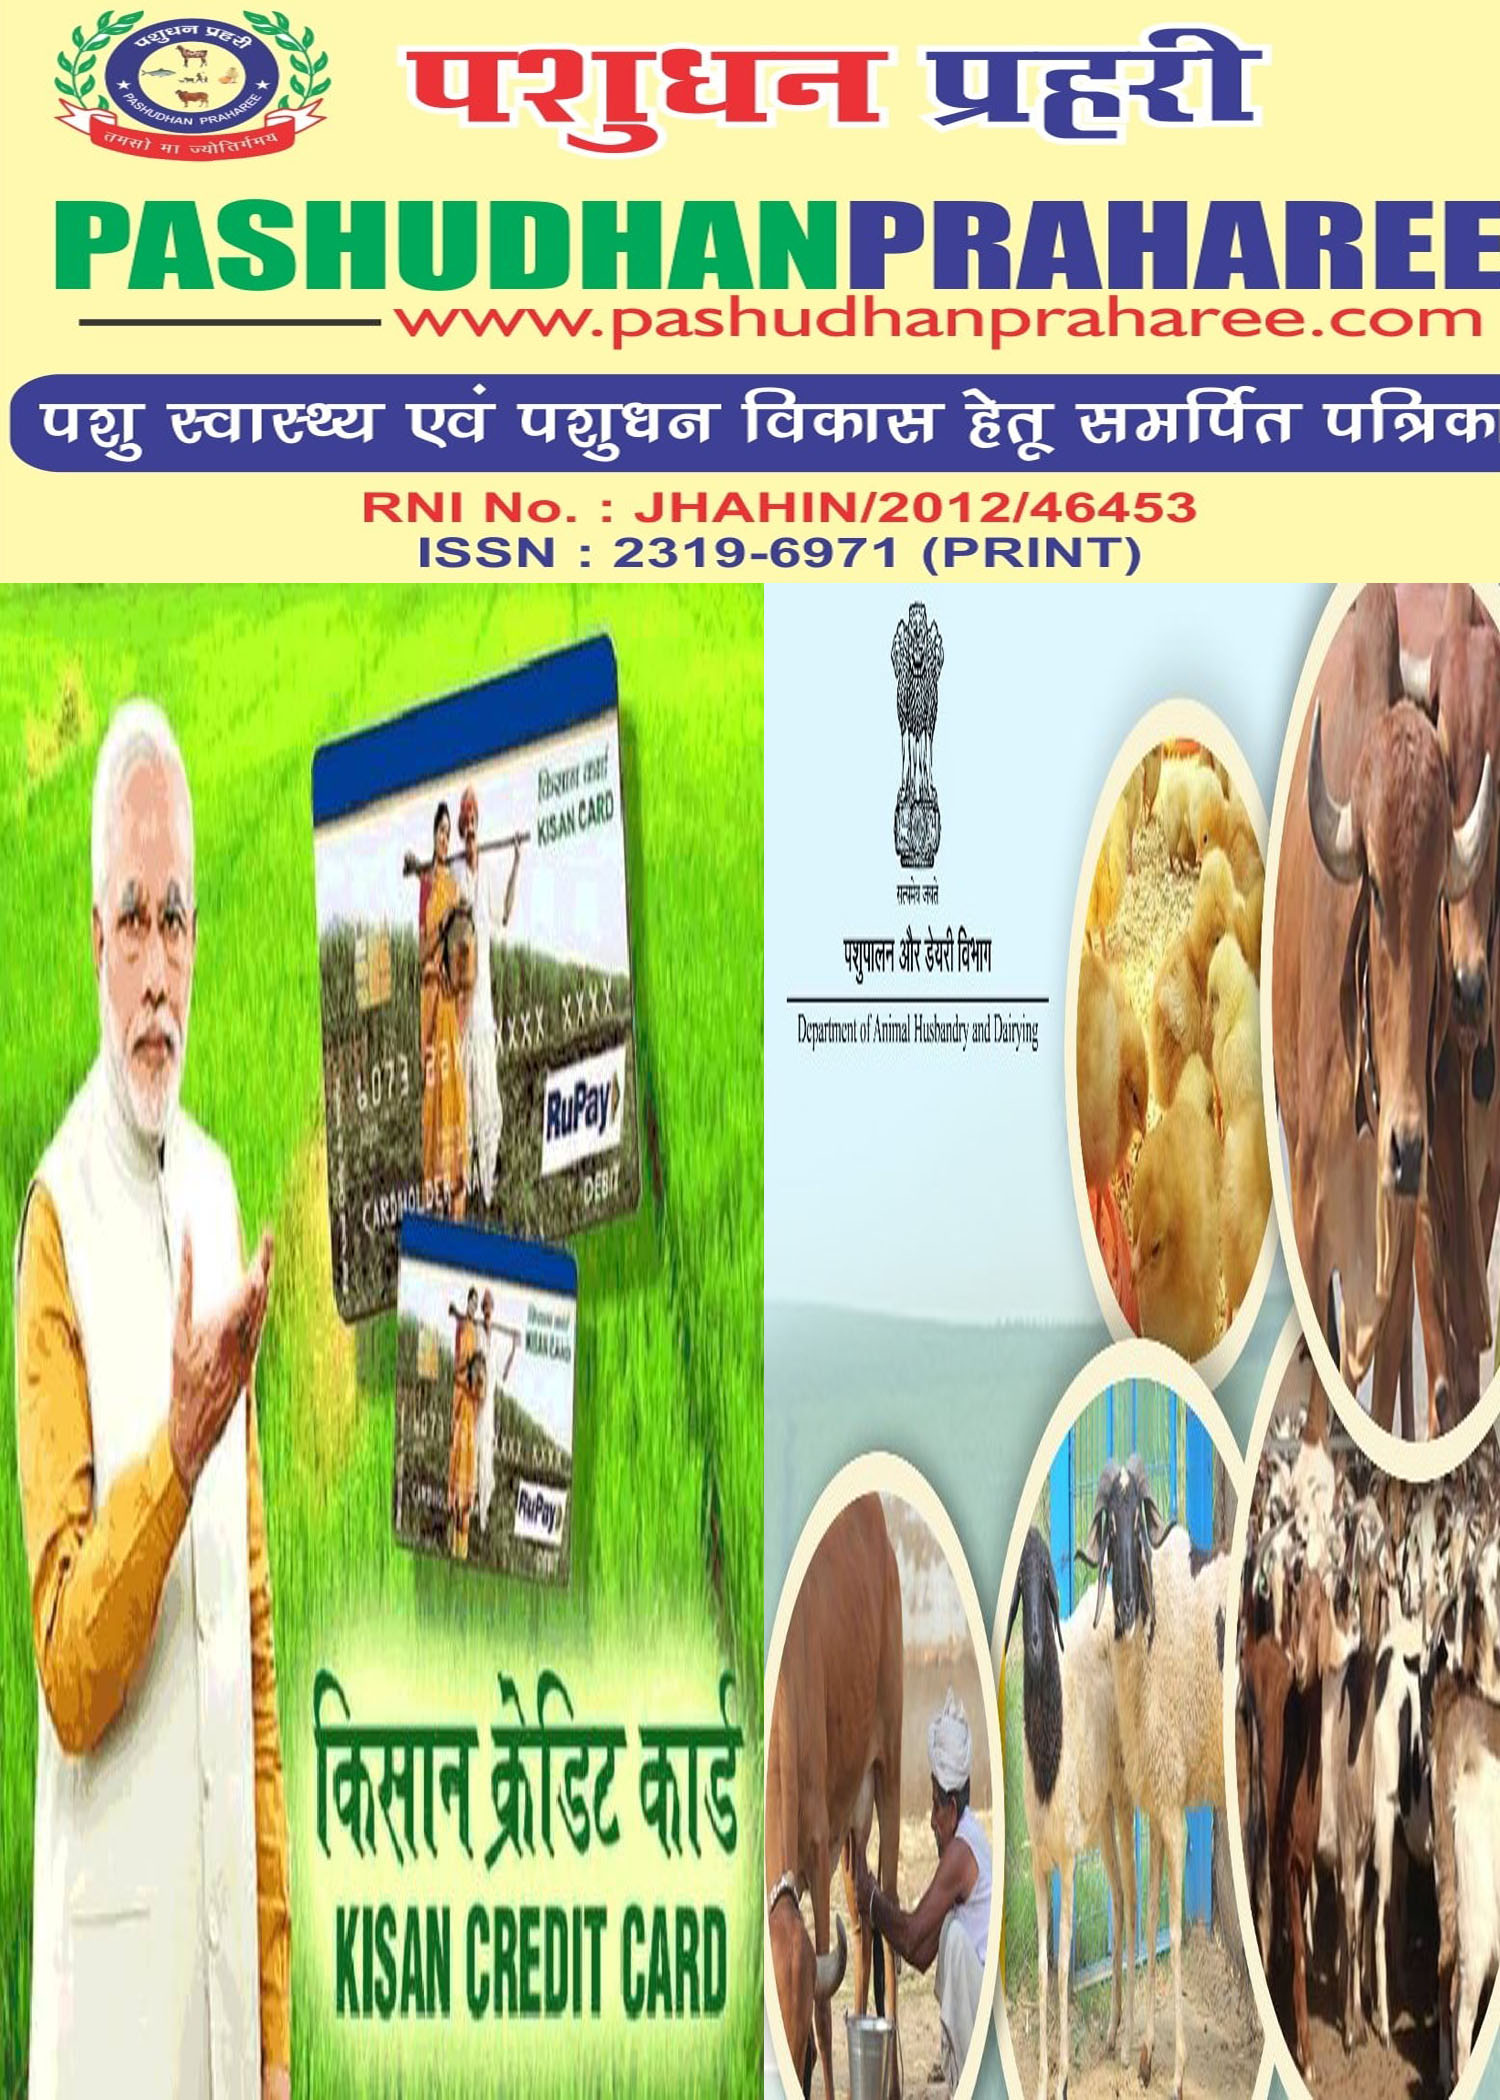 Guidelines or SOP for Kisan Credit Cards (KCC) to Livestock Farmers in India